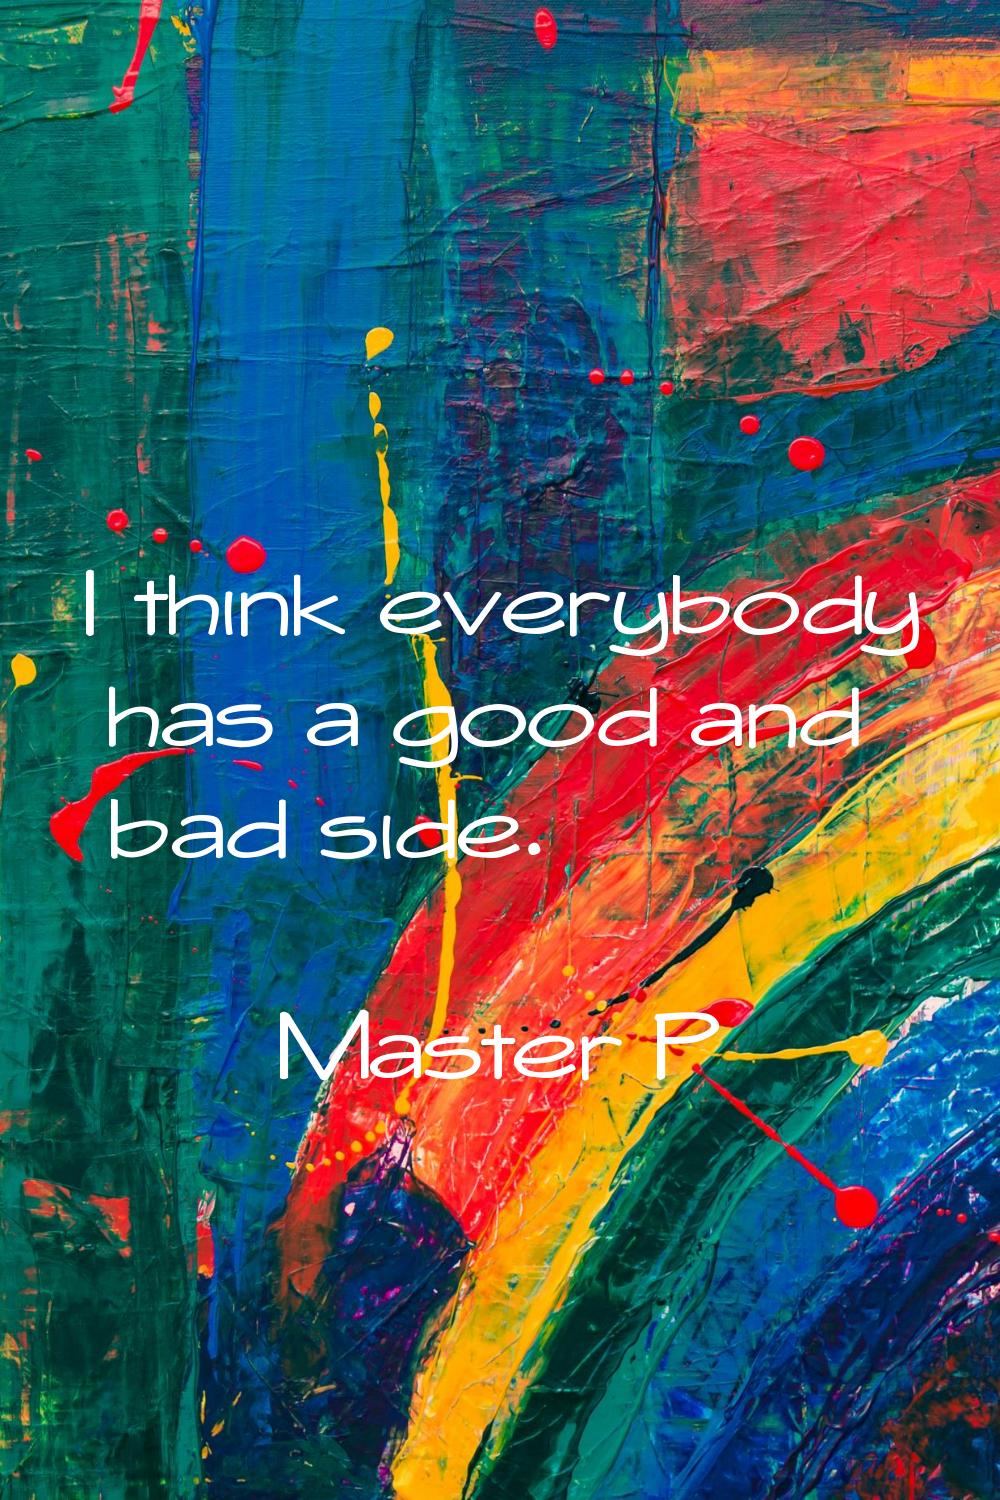 I think everybody has a good and bad side.